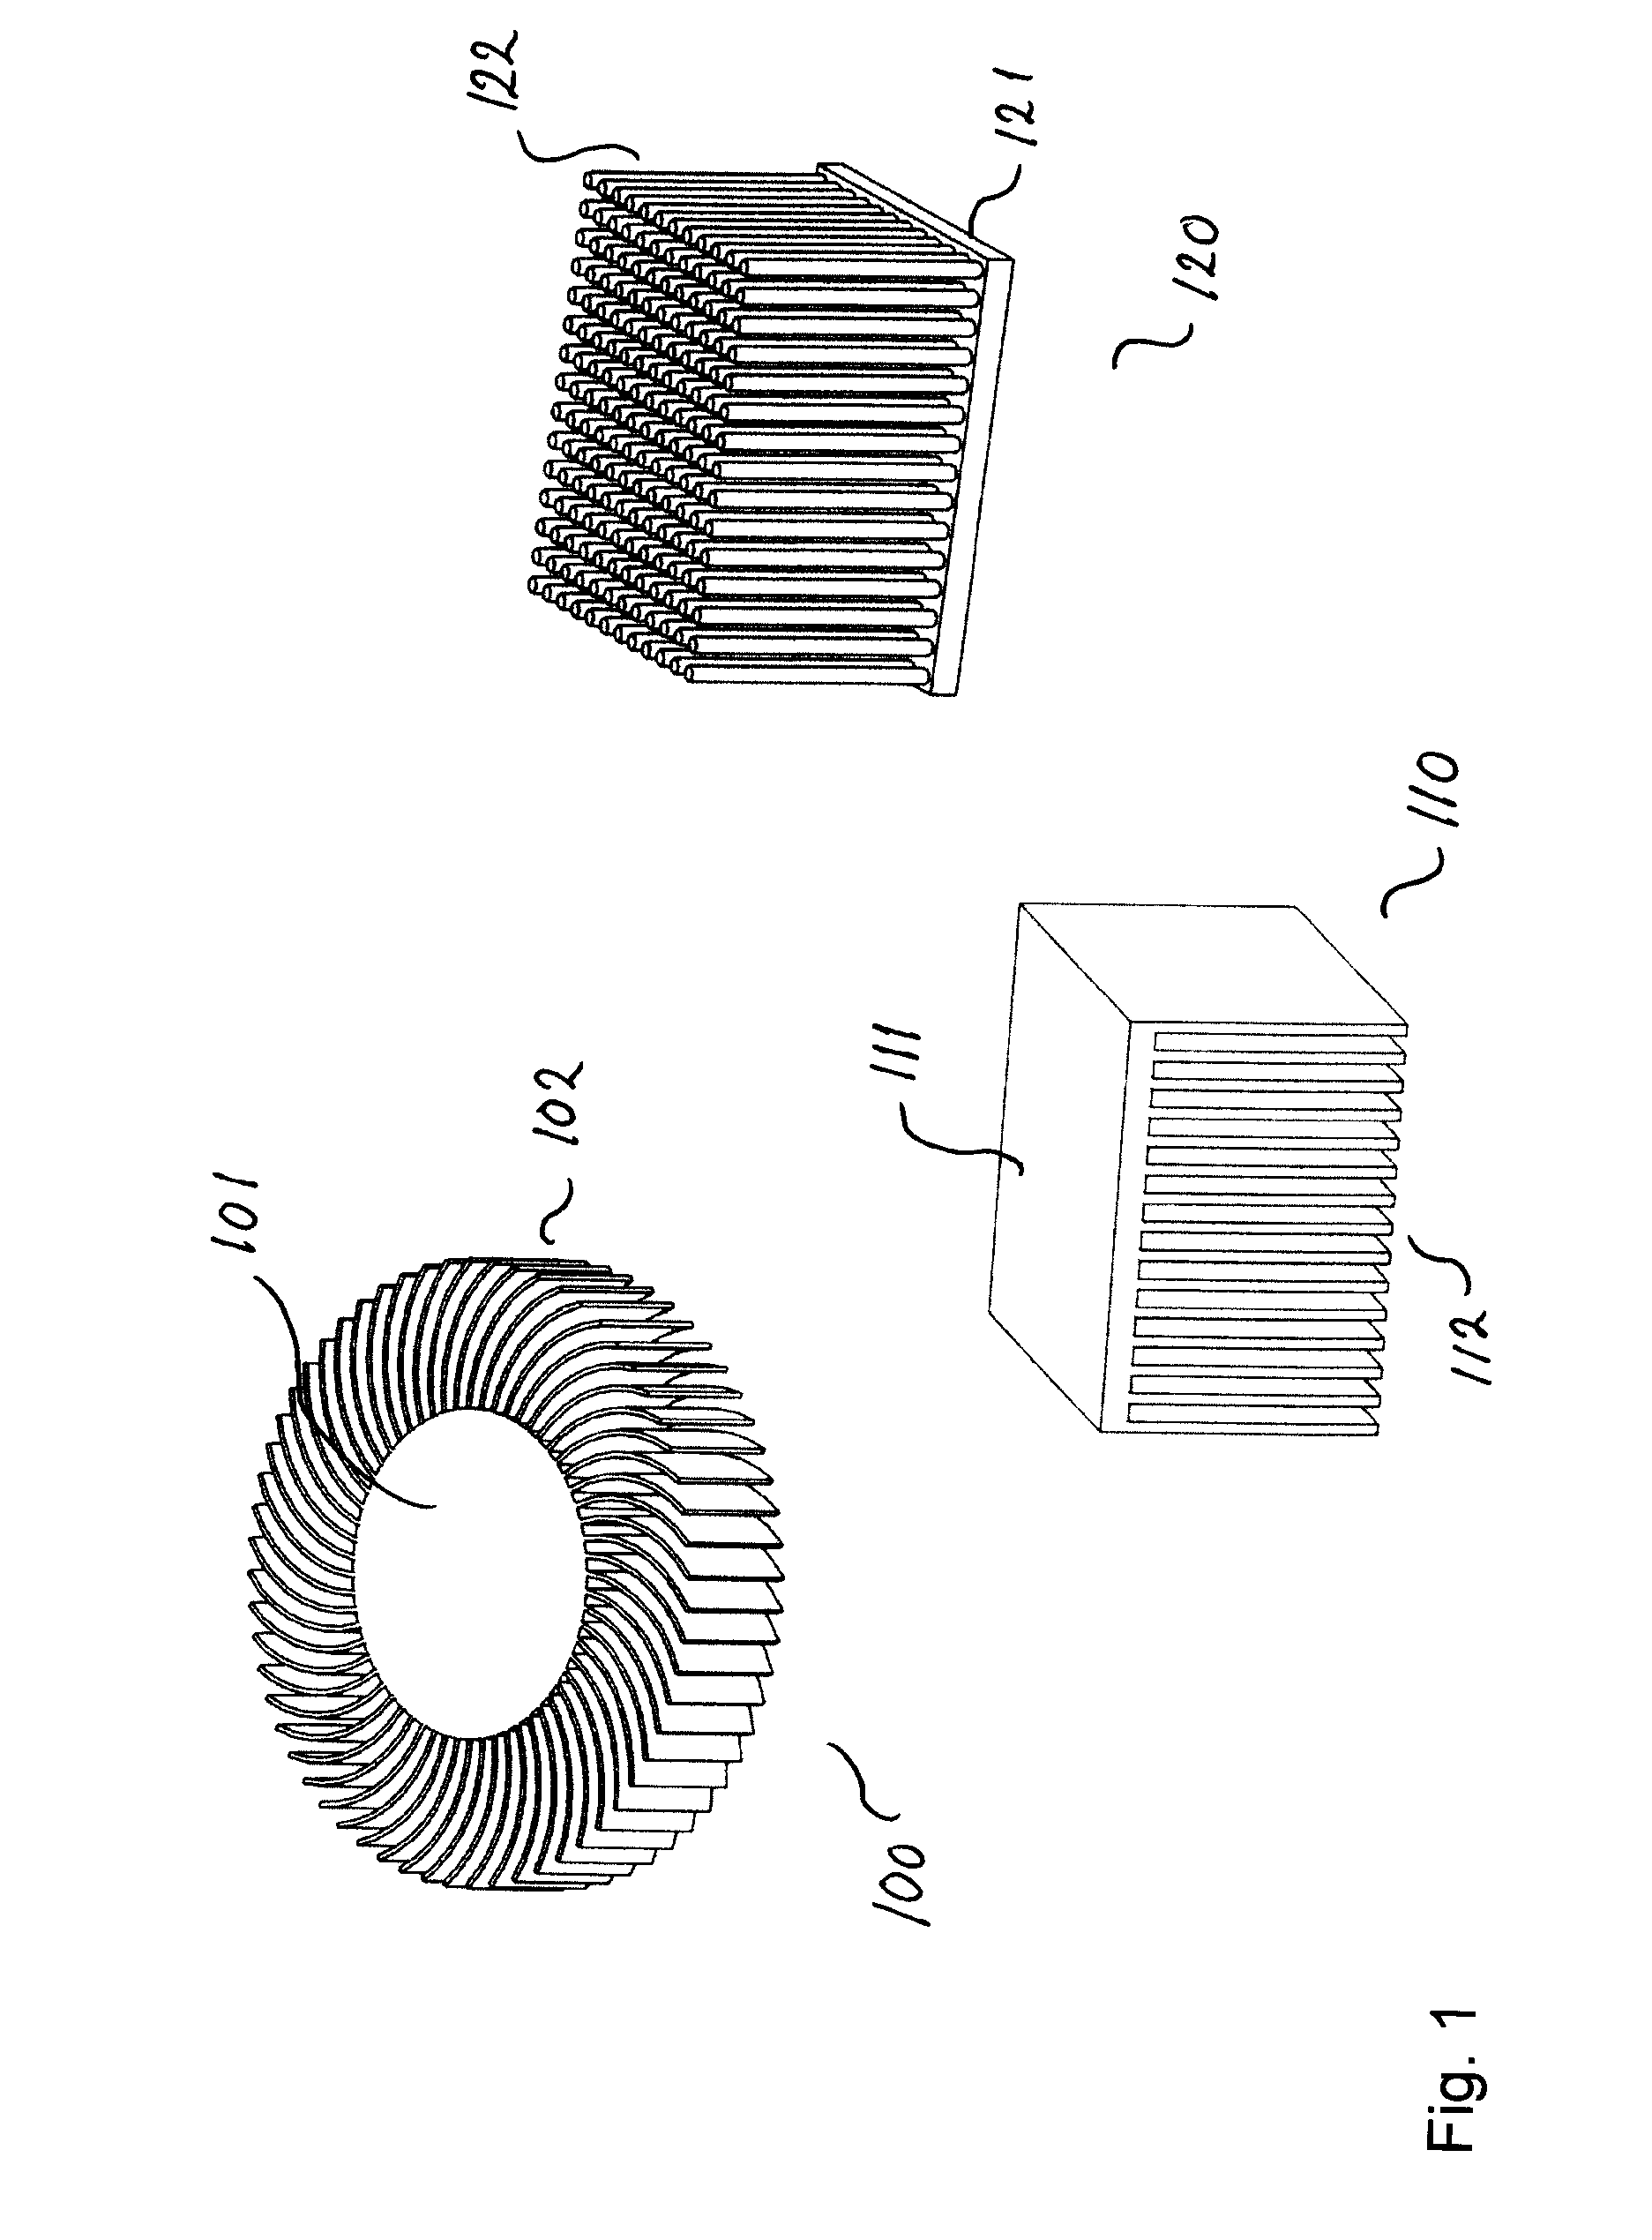 Heat Sink Having a Cooling Structure with Decreasing Structure Density